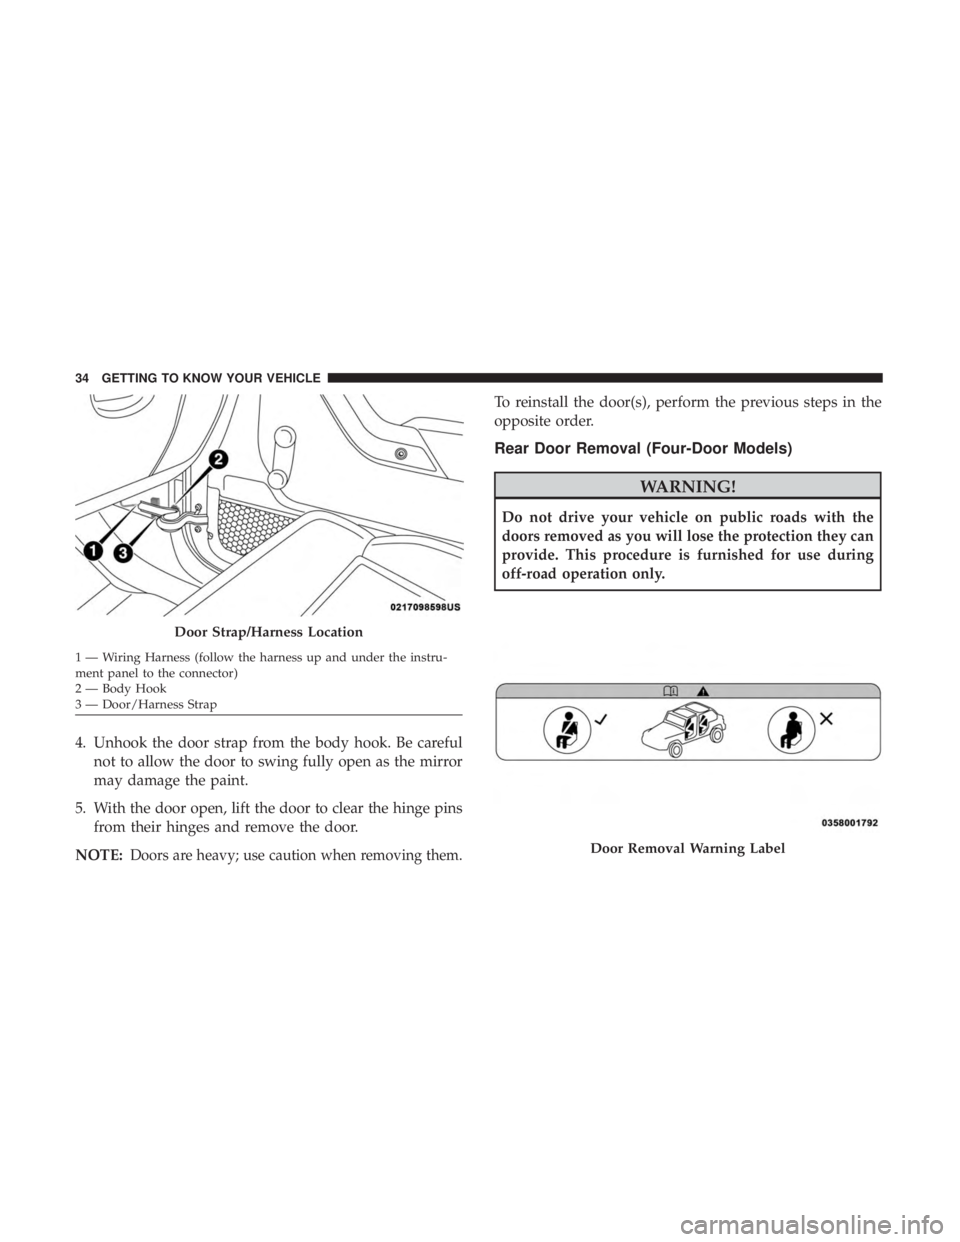 JEEP WRANGLER UNLIMITED SPORT 2016 Owners Guide 4. Unhook the door strap from the body hook. Be carefulnot to allow the door to swing fully open as the mirror
may damage the paint.
5. With the door open, lift the door to clear the hinge pins from t